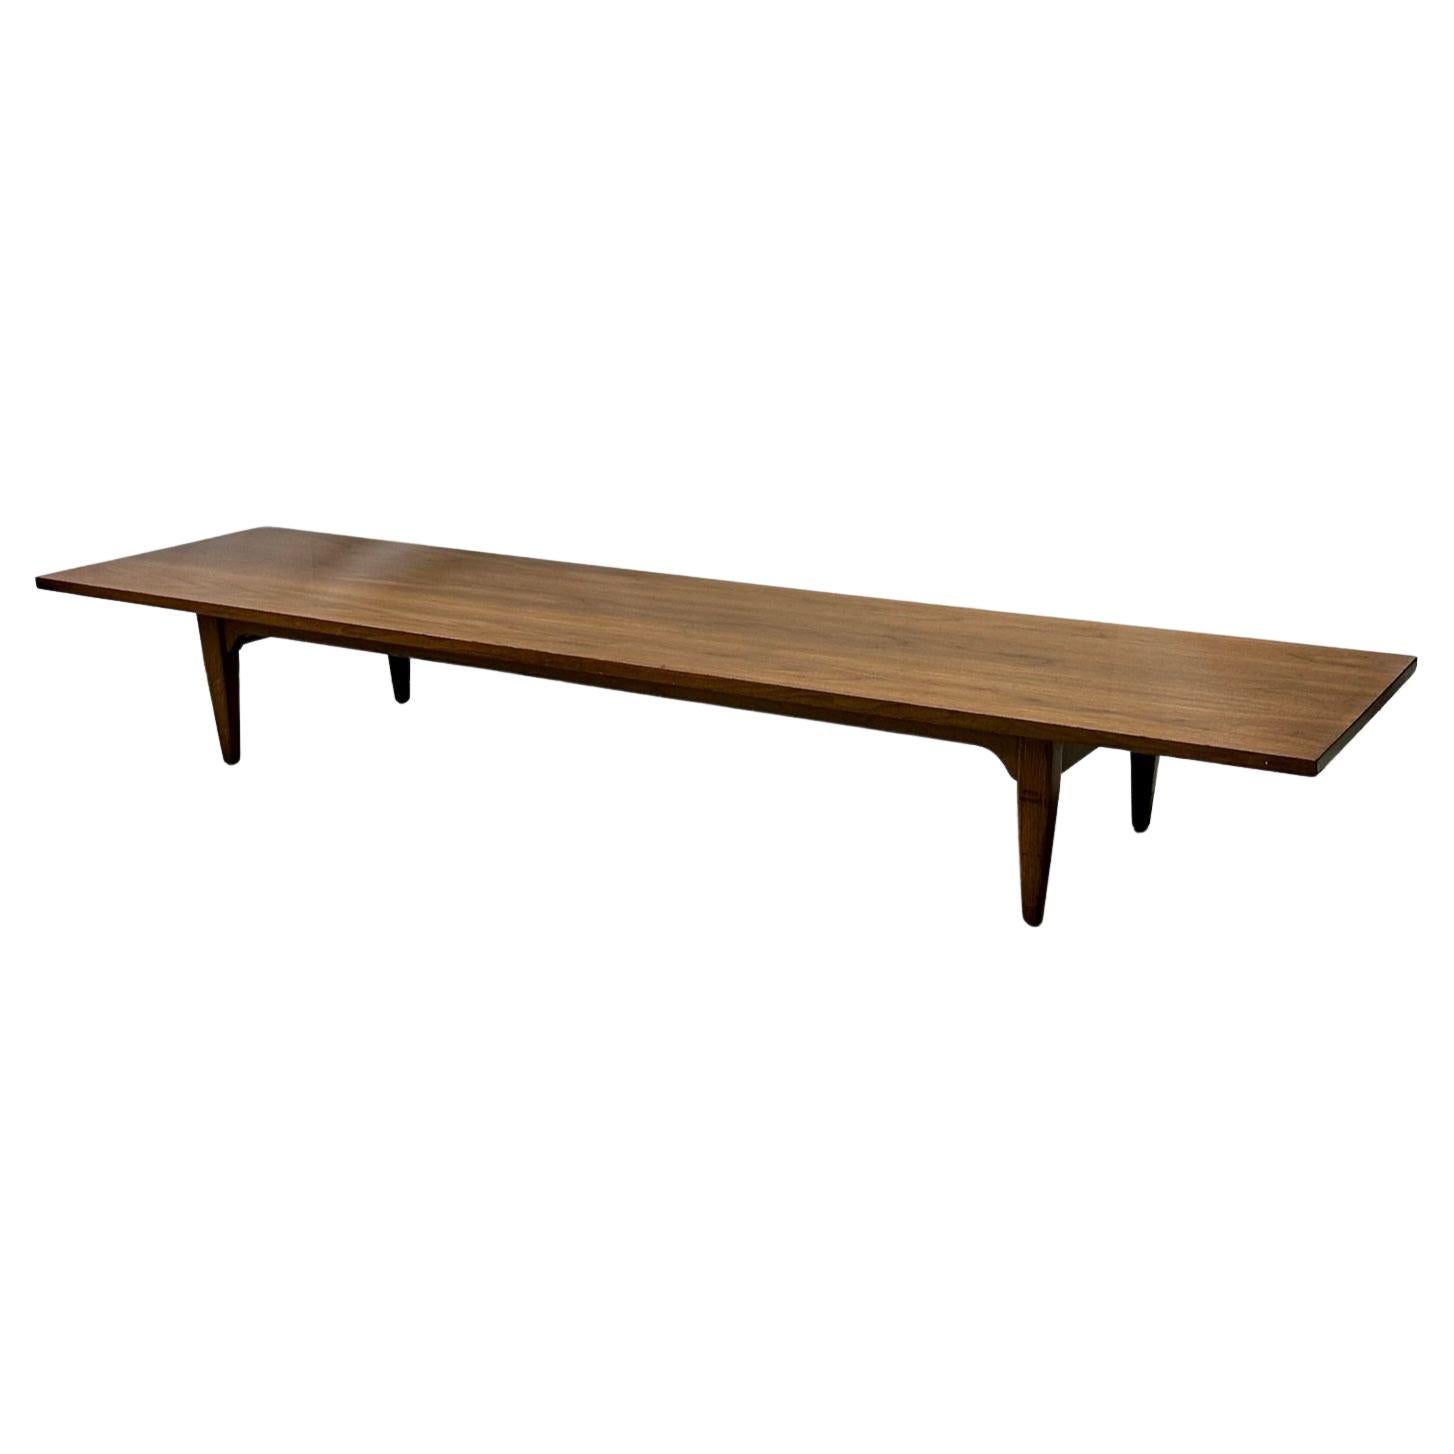 Danish Mid-Century Modern Cocktail or Coffee Table, 1950s, Solid Teak For Sale